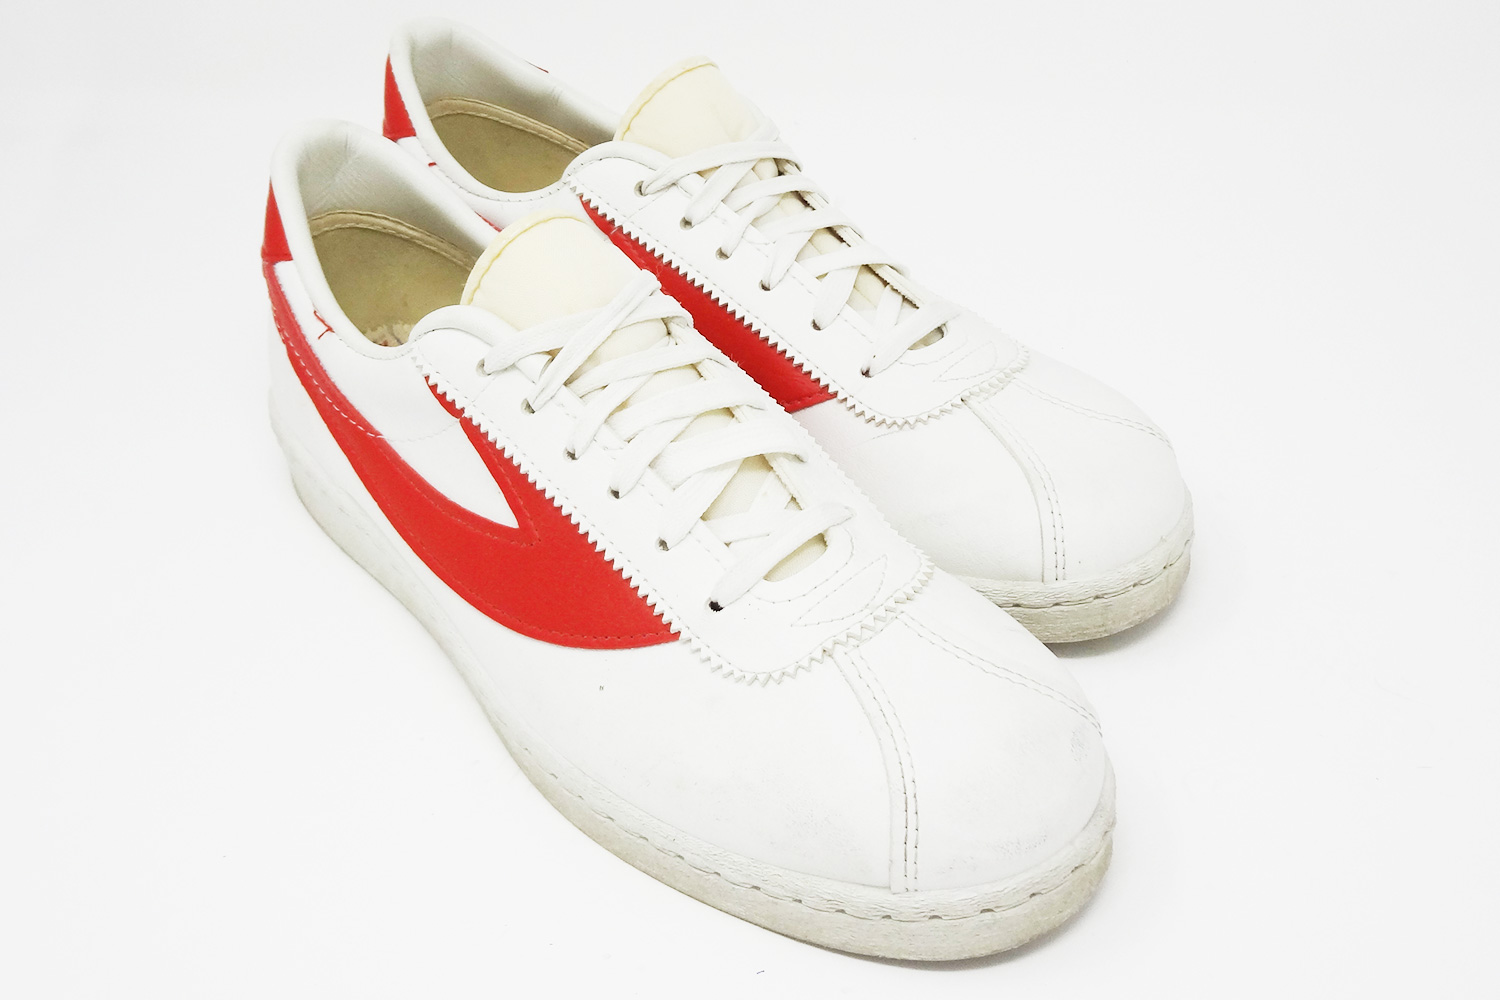 Classic 1980s Trax by Kmart vintage Nike Bruin style sneakers @ The Deffest